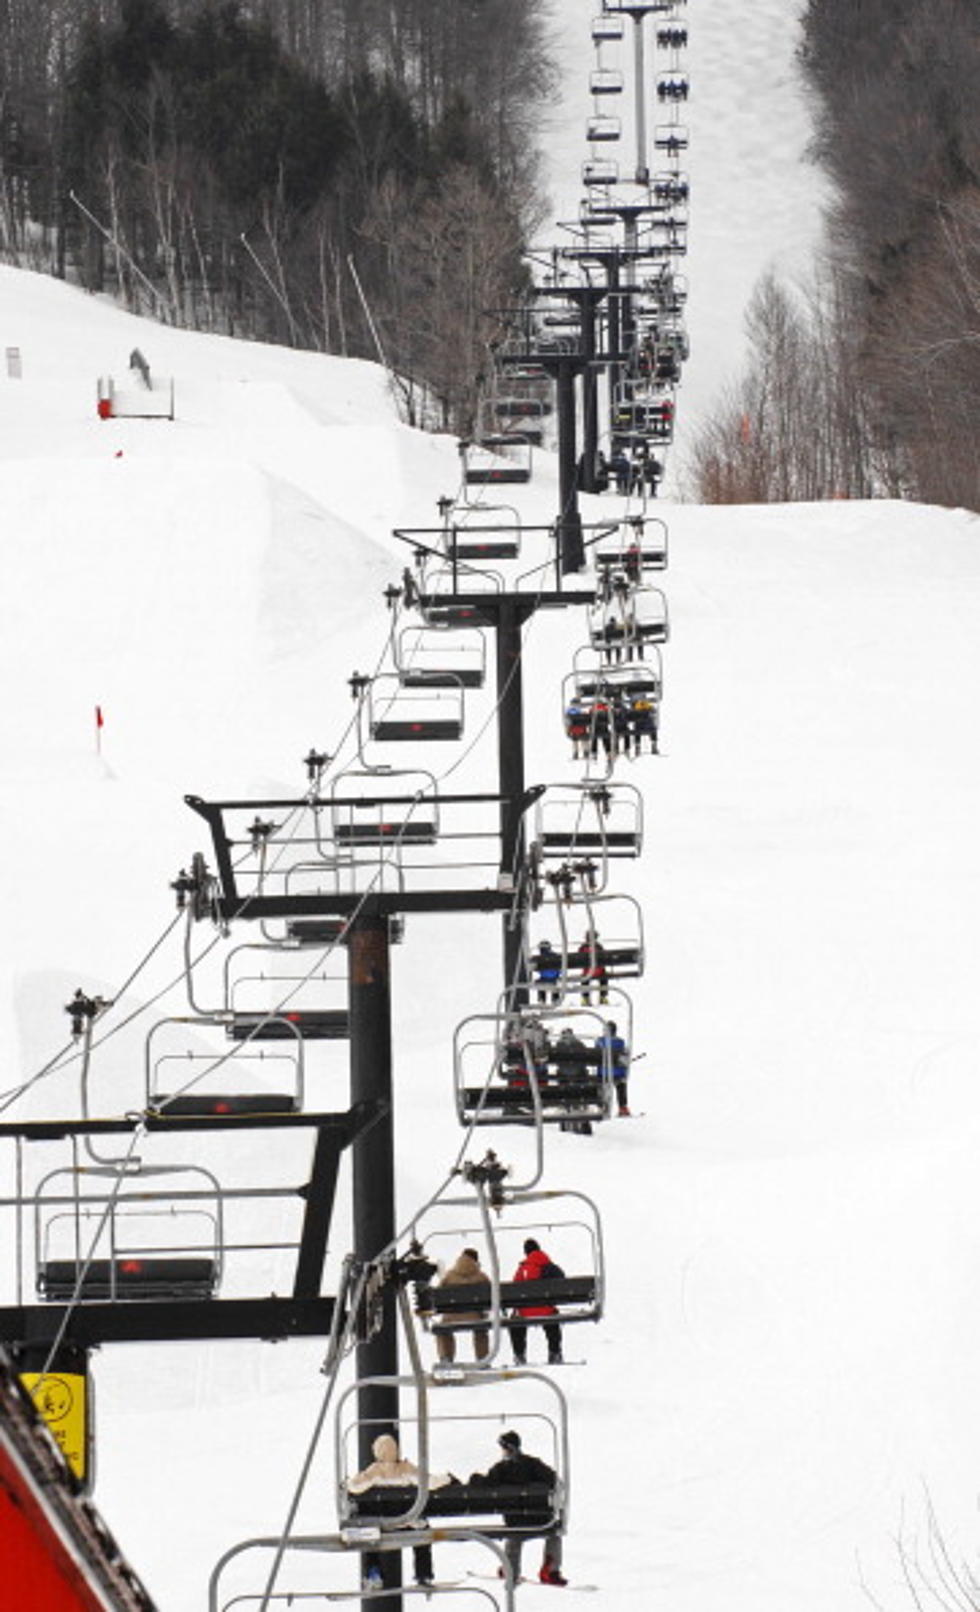 As Snow Keeps Falling, More Ski Trails Open in Maine and N.H. [PHOTOS]